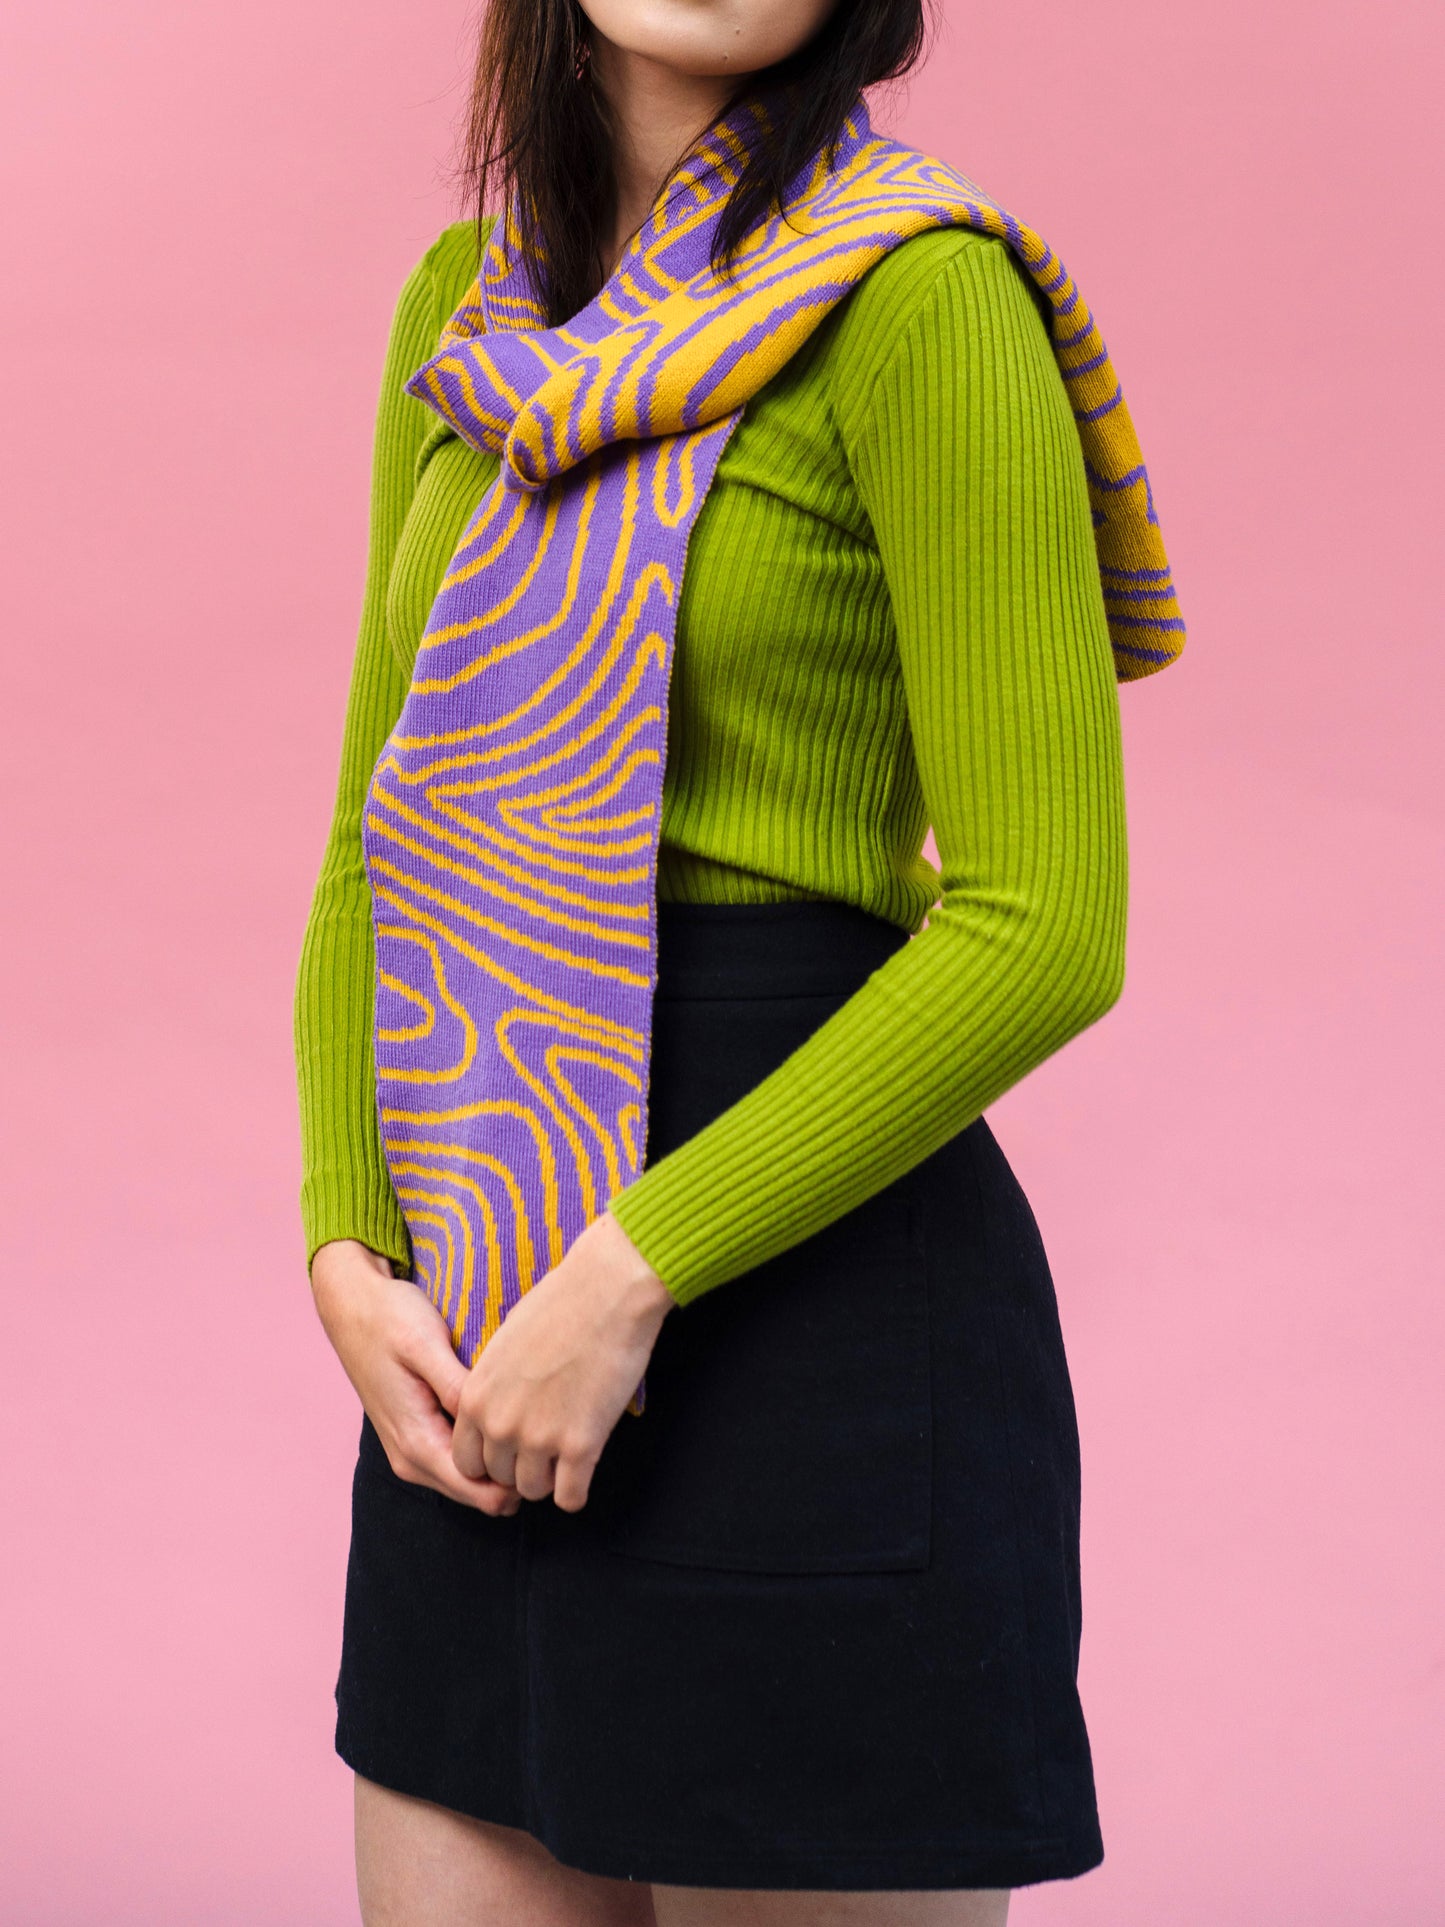 Swirly Stripe Wool and Cashmere Scarf in Purple and Orange Made to order